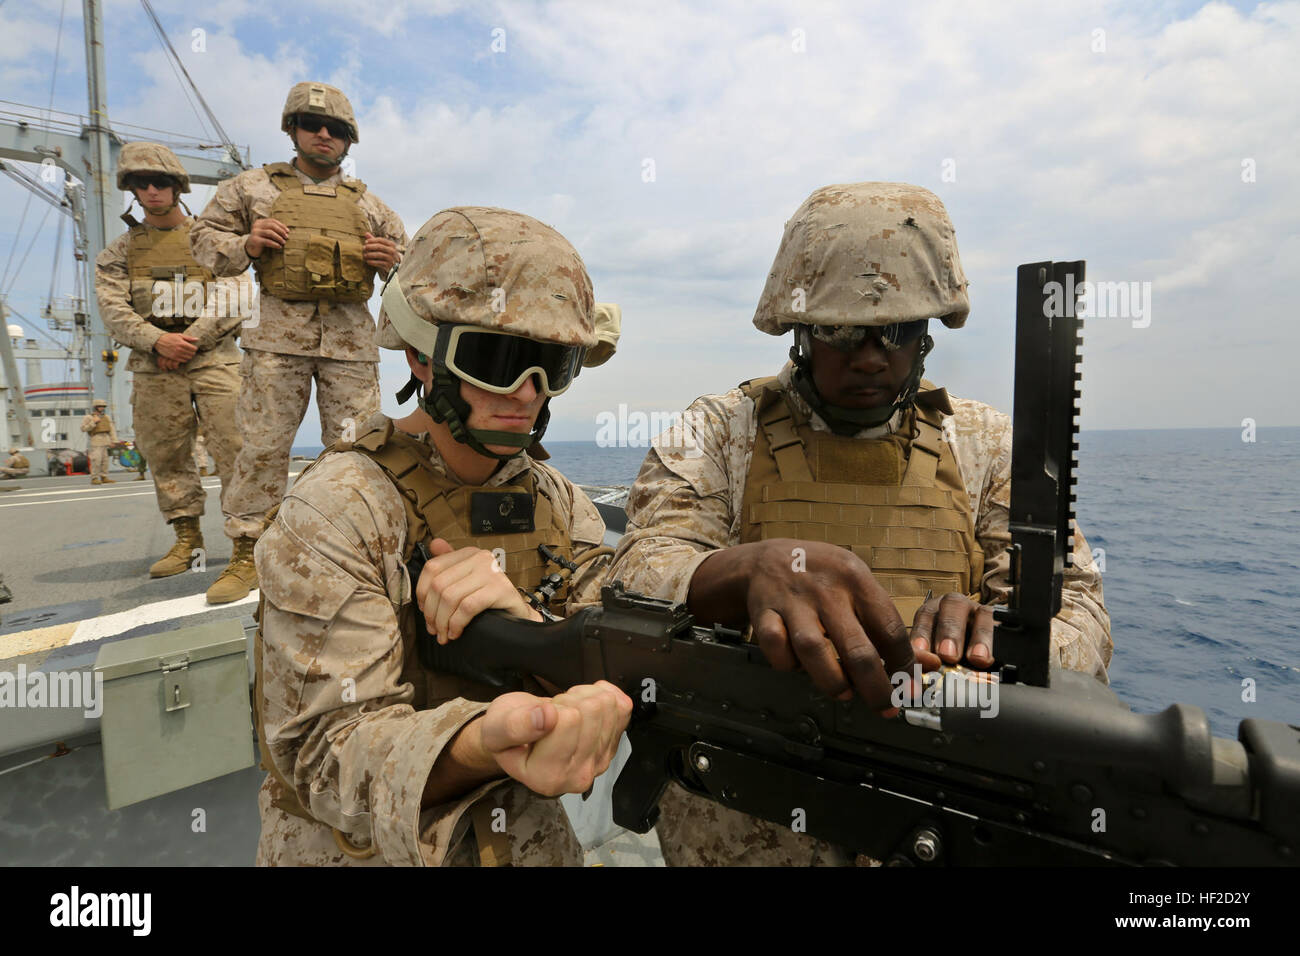 U.S. Marines assigned to Marine Aviation Logistics Squadron (MALS) 14, MALS-26, MALS-29, and MALS-31, load a M240B machine gun aboard the S.S. Wright during Operation Carolina Dragon, Aug. 9, 2014. Carolina Dragon consisted of a 31 day operation with 12 units exercising their quick response deployment capabilities. (U.S. Marine Corps photo by Lance Cpl. Derek L. Picklesimer/Released) MALS Marines in support of Operation Carolina Dragon 140809-M-MZ489-195 Stock Photo